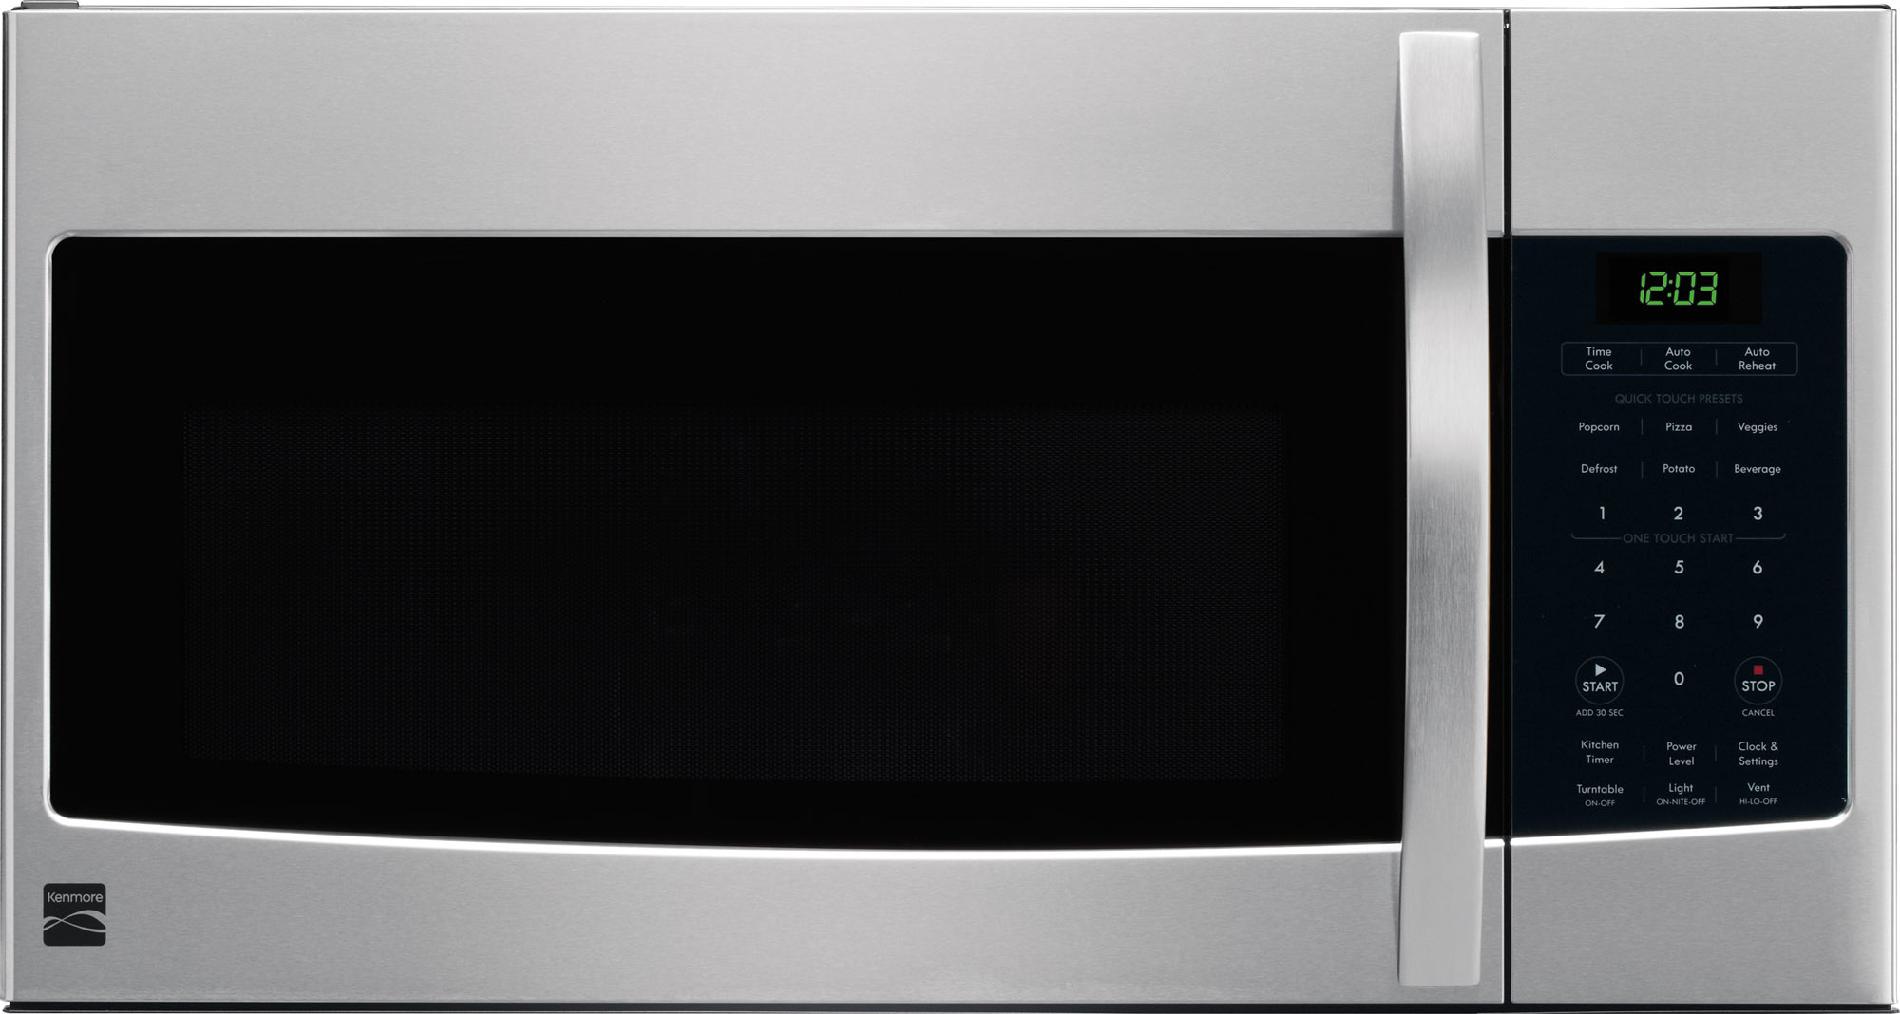 Kenmore 1.6 cu. ft. Over-the-Range Microwave - Stainless Steel